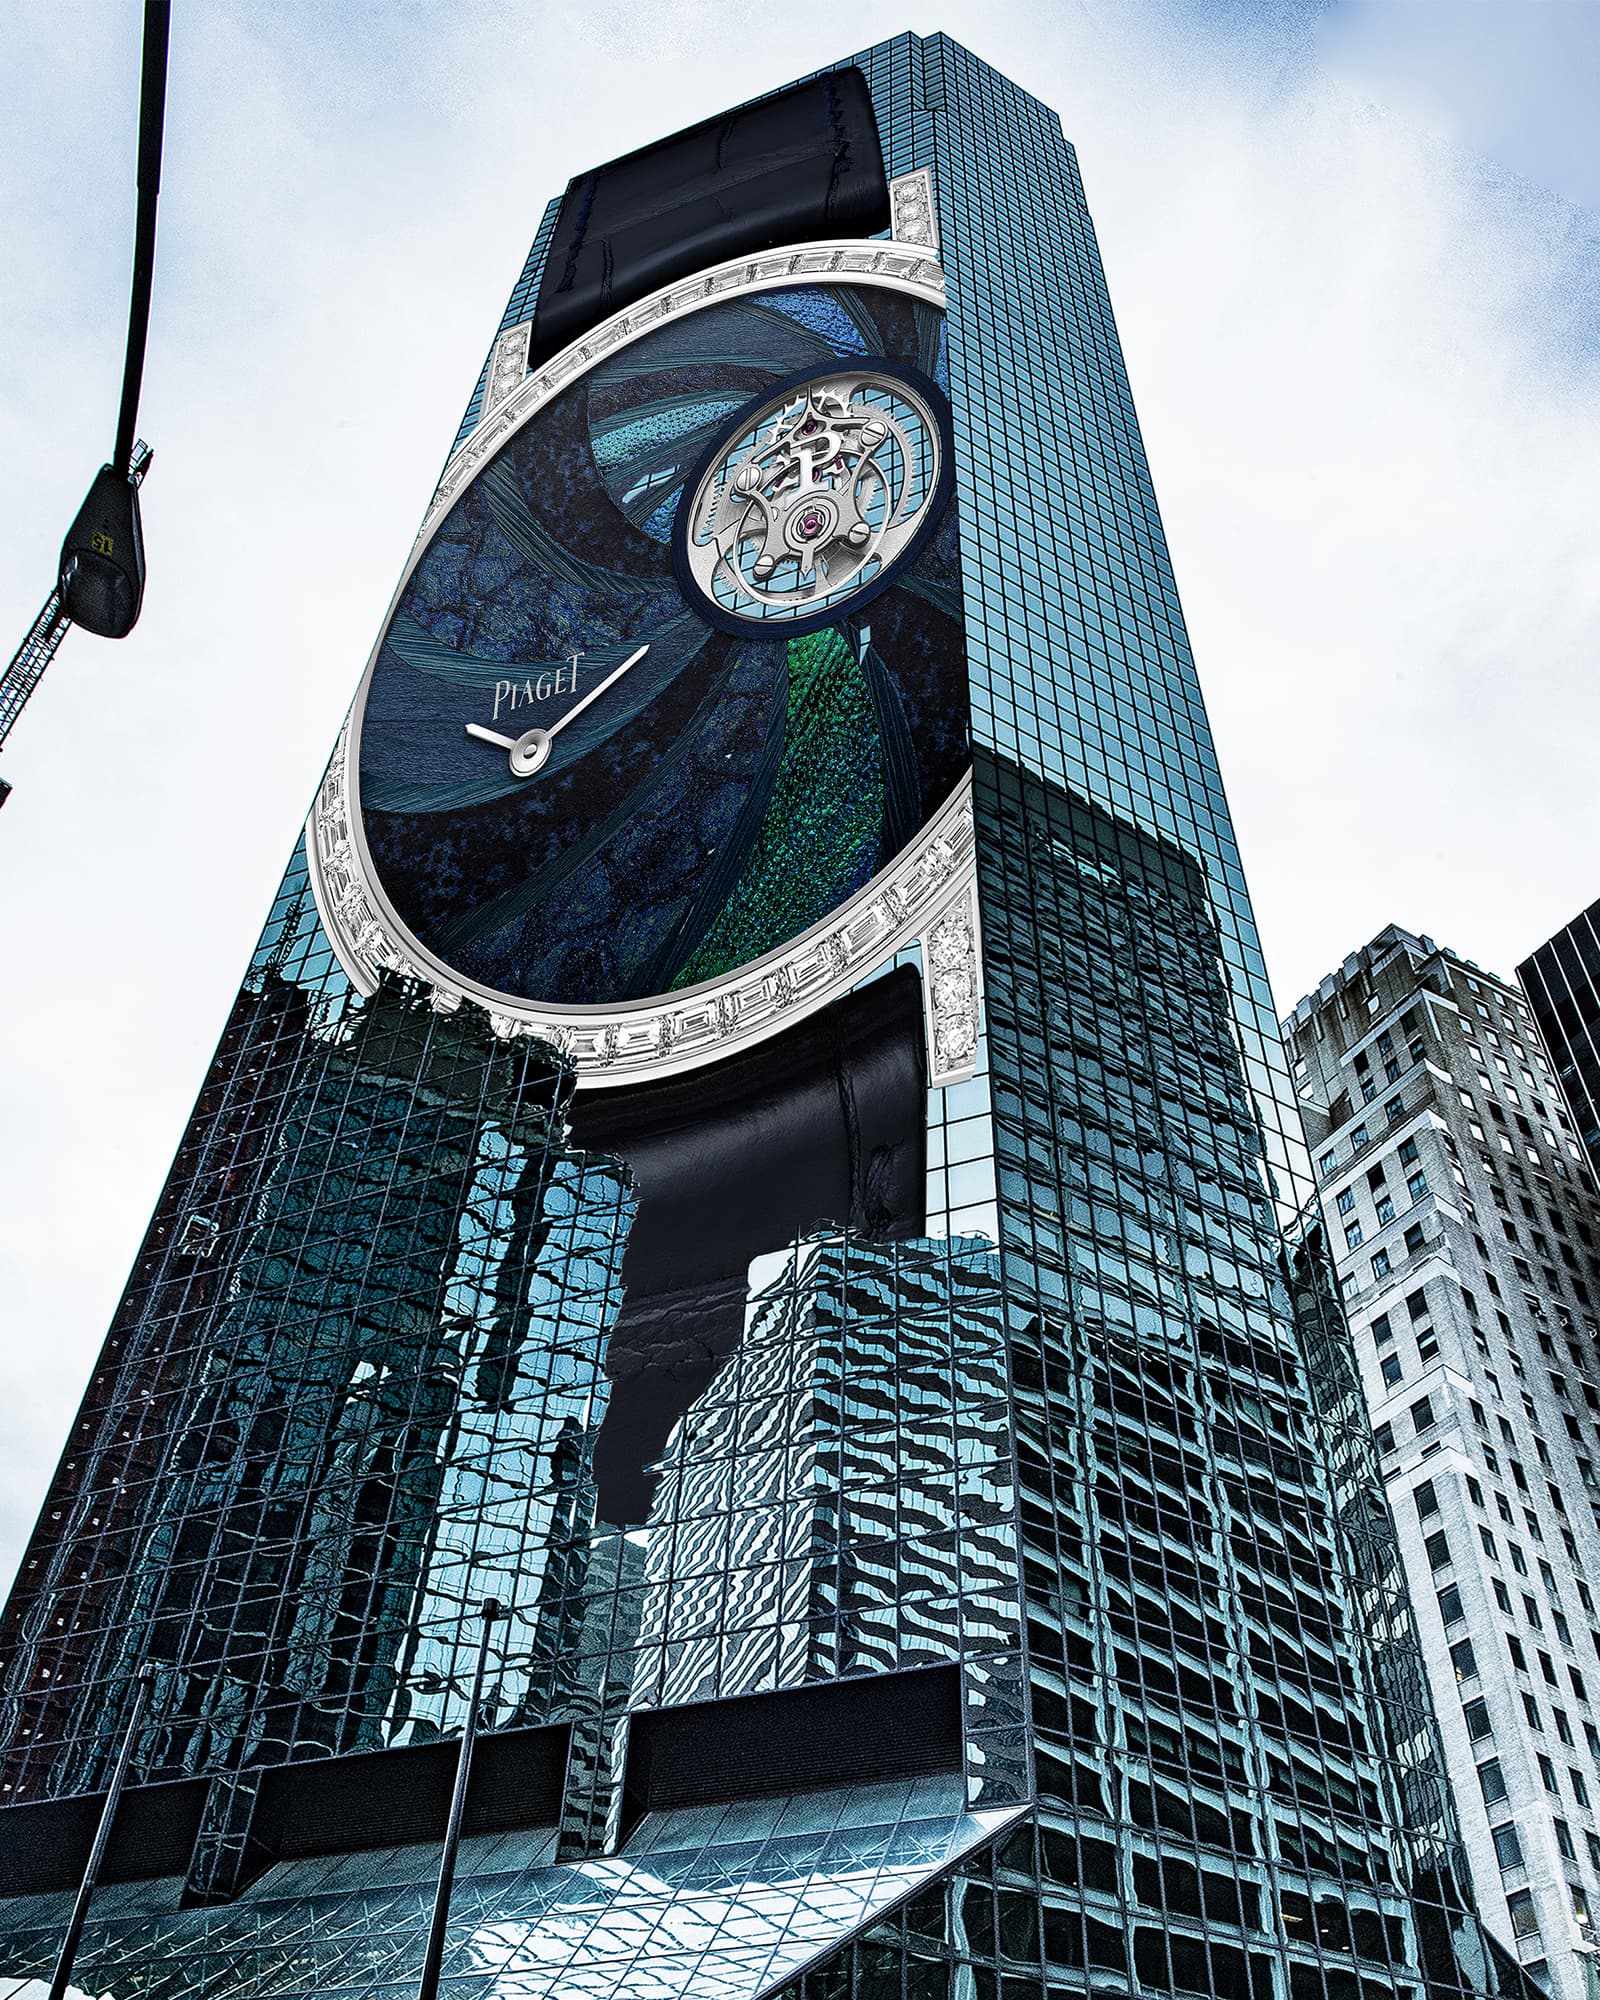 A Piaget timepiece transforms the facia of this skyscraper in a new ‘archellery’ photo artwork by Veronica Morales Angulo